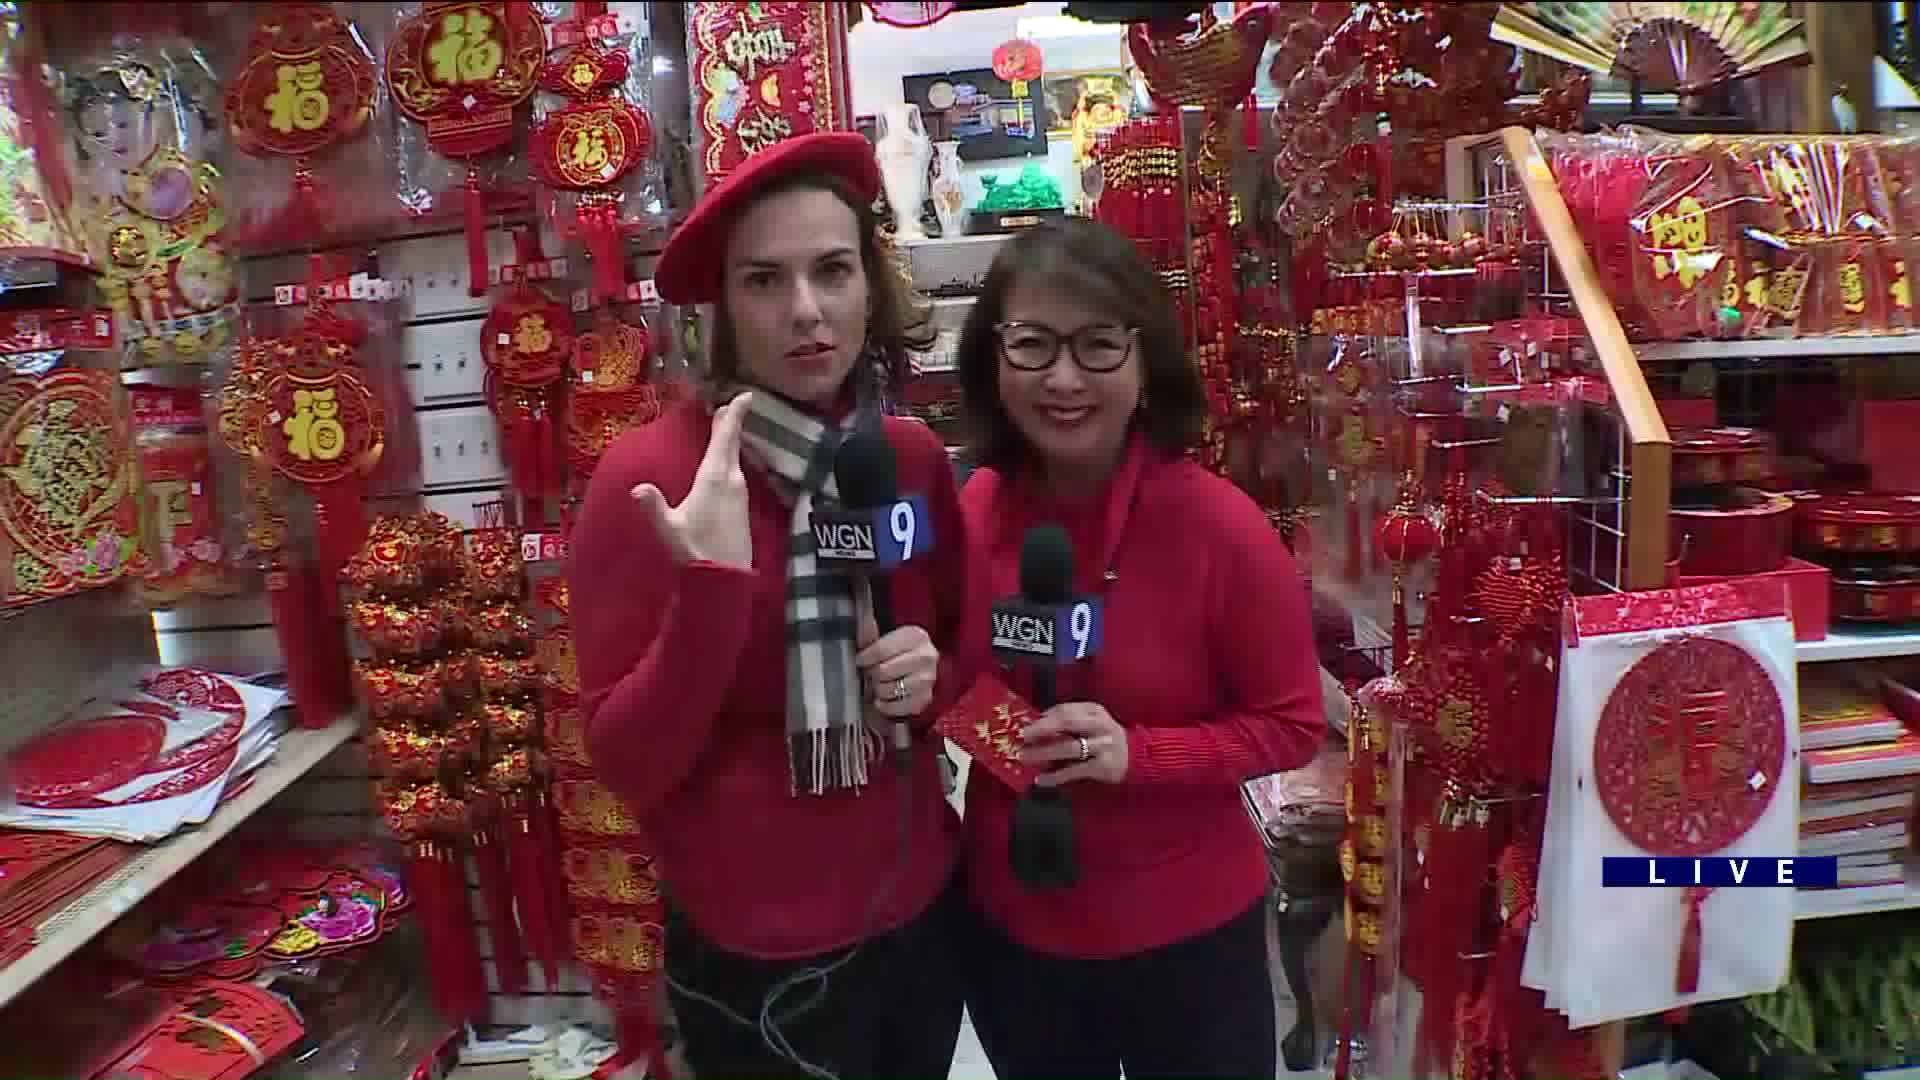 Around Town heads to Chinatown with Nancy Loo